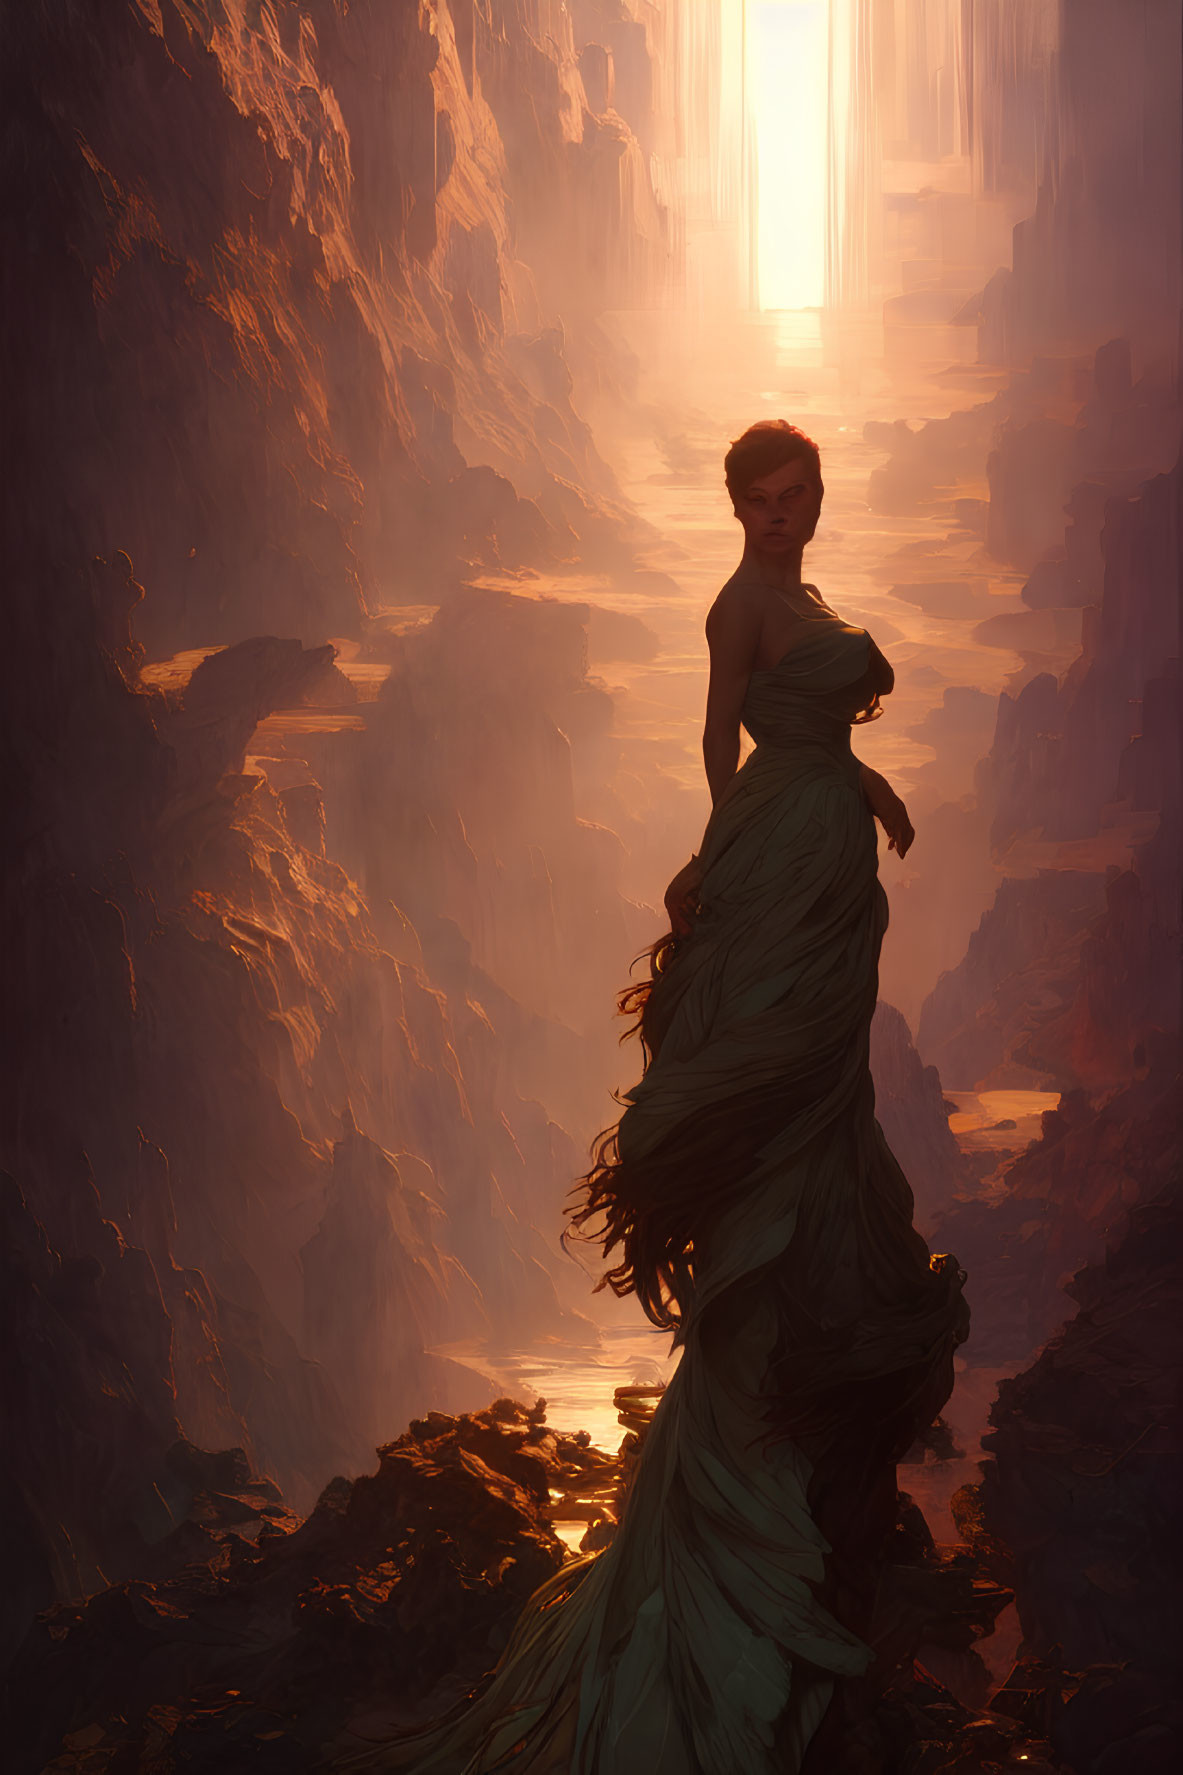 Woman in Elegant Green Dress on Cliff Overlooking Golden Sunlit Canyon